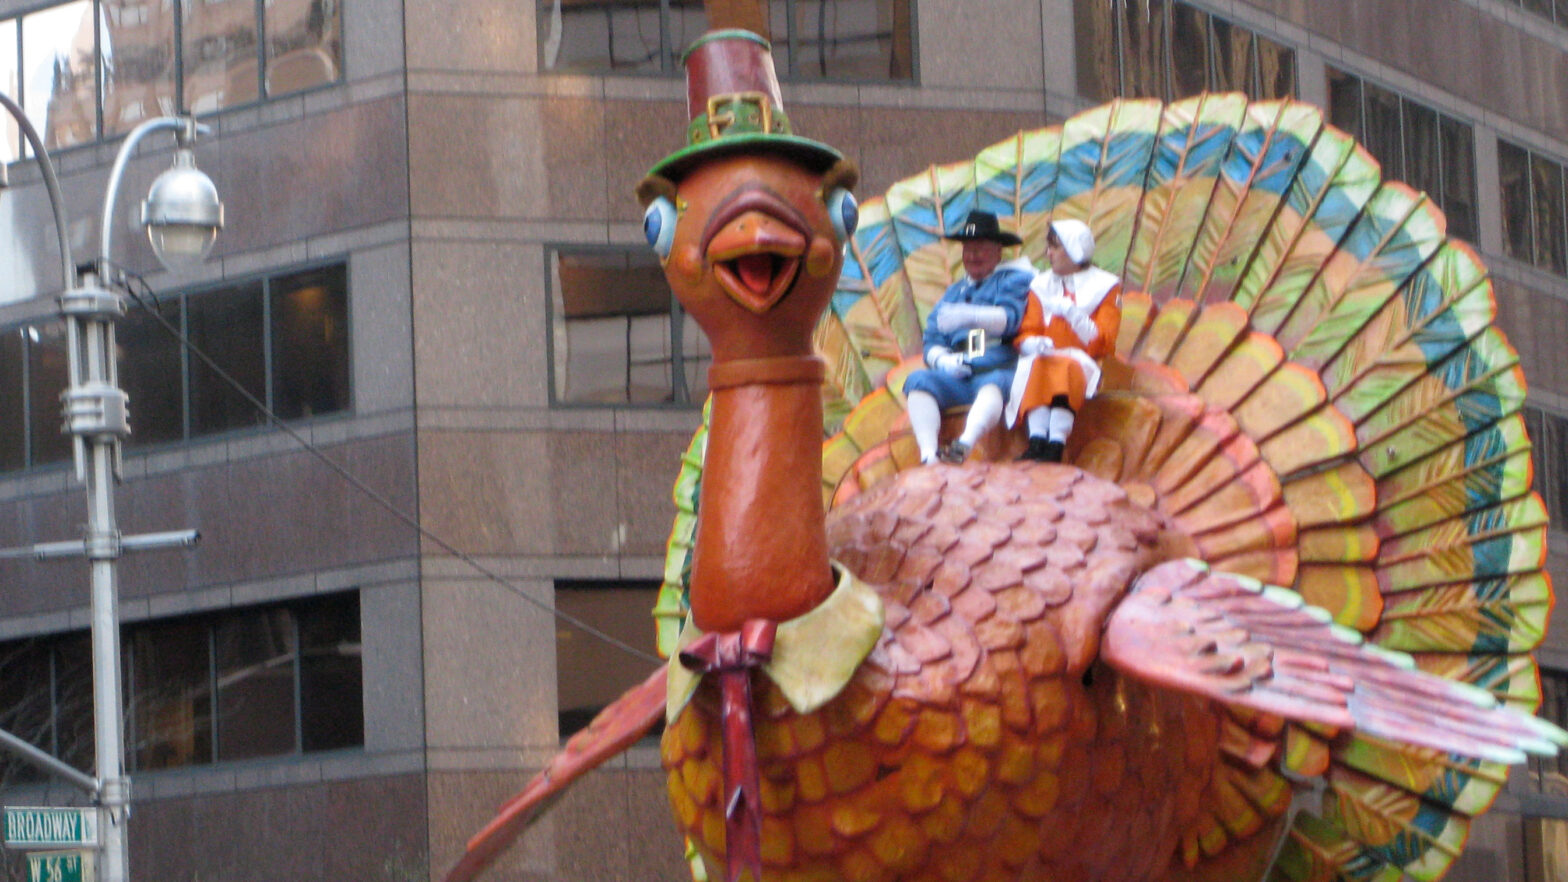 This Year’s Macy’s Thanksgiving Day Parade Will Be Depressing